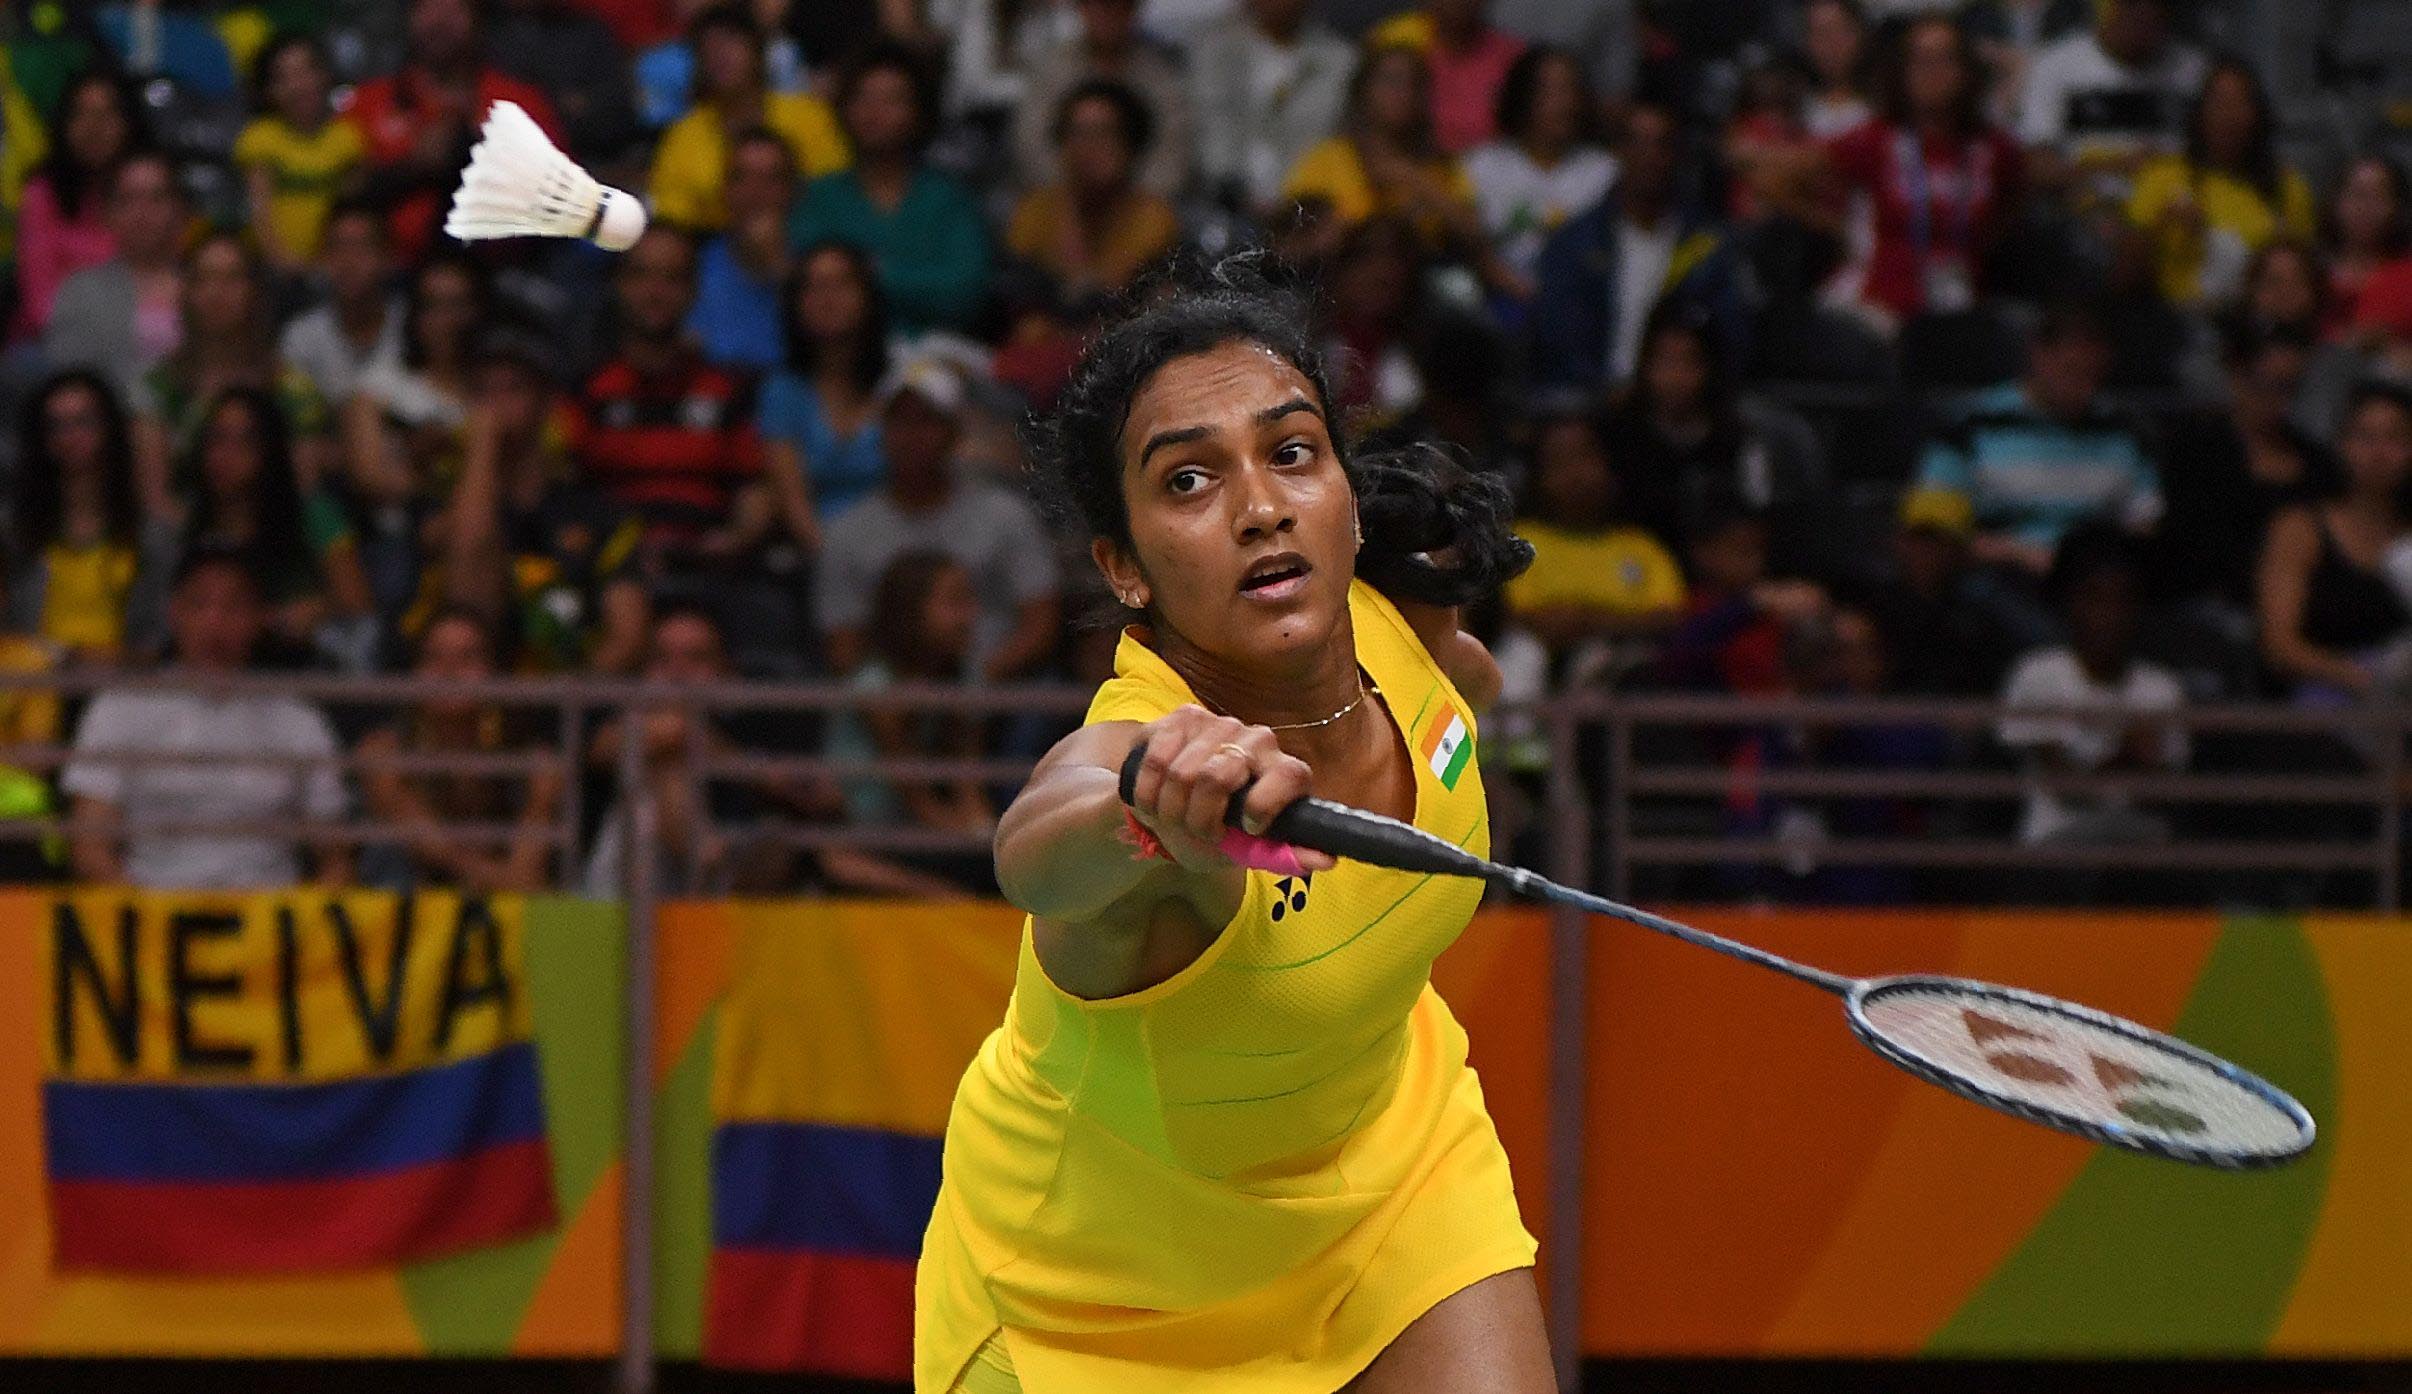 Rio 2016 PV Sindhu in quarter-final Live streaming and where to watch on TV in India